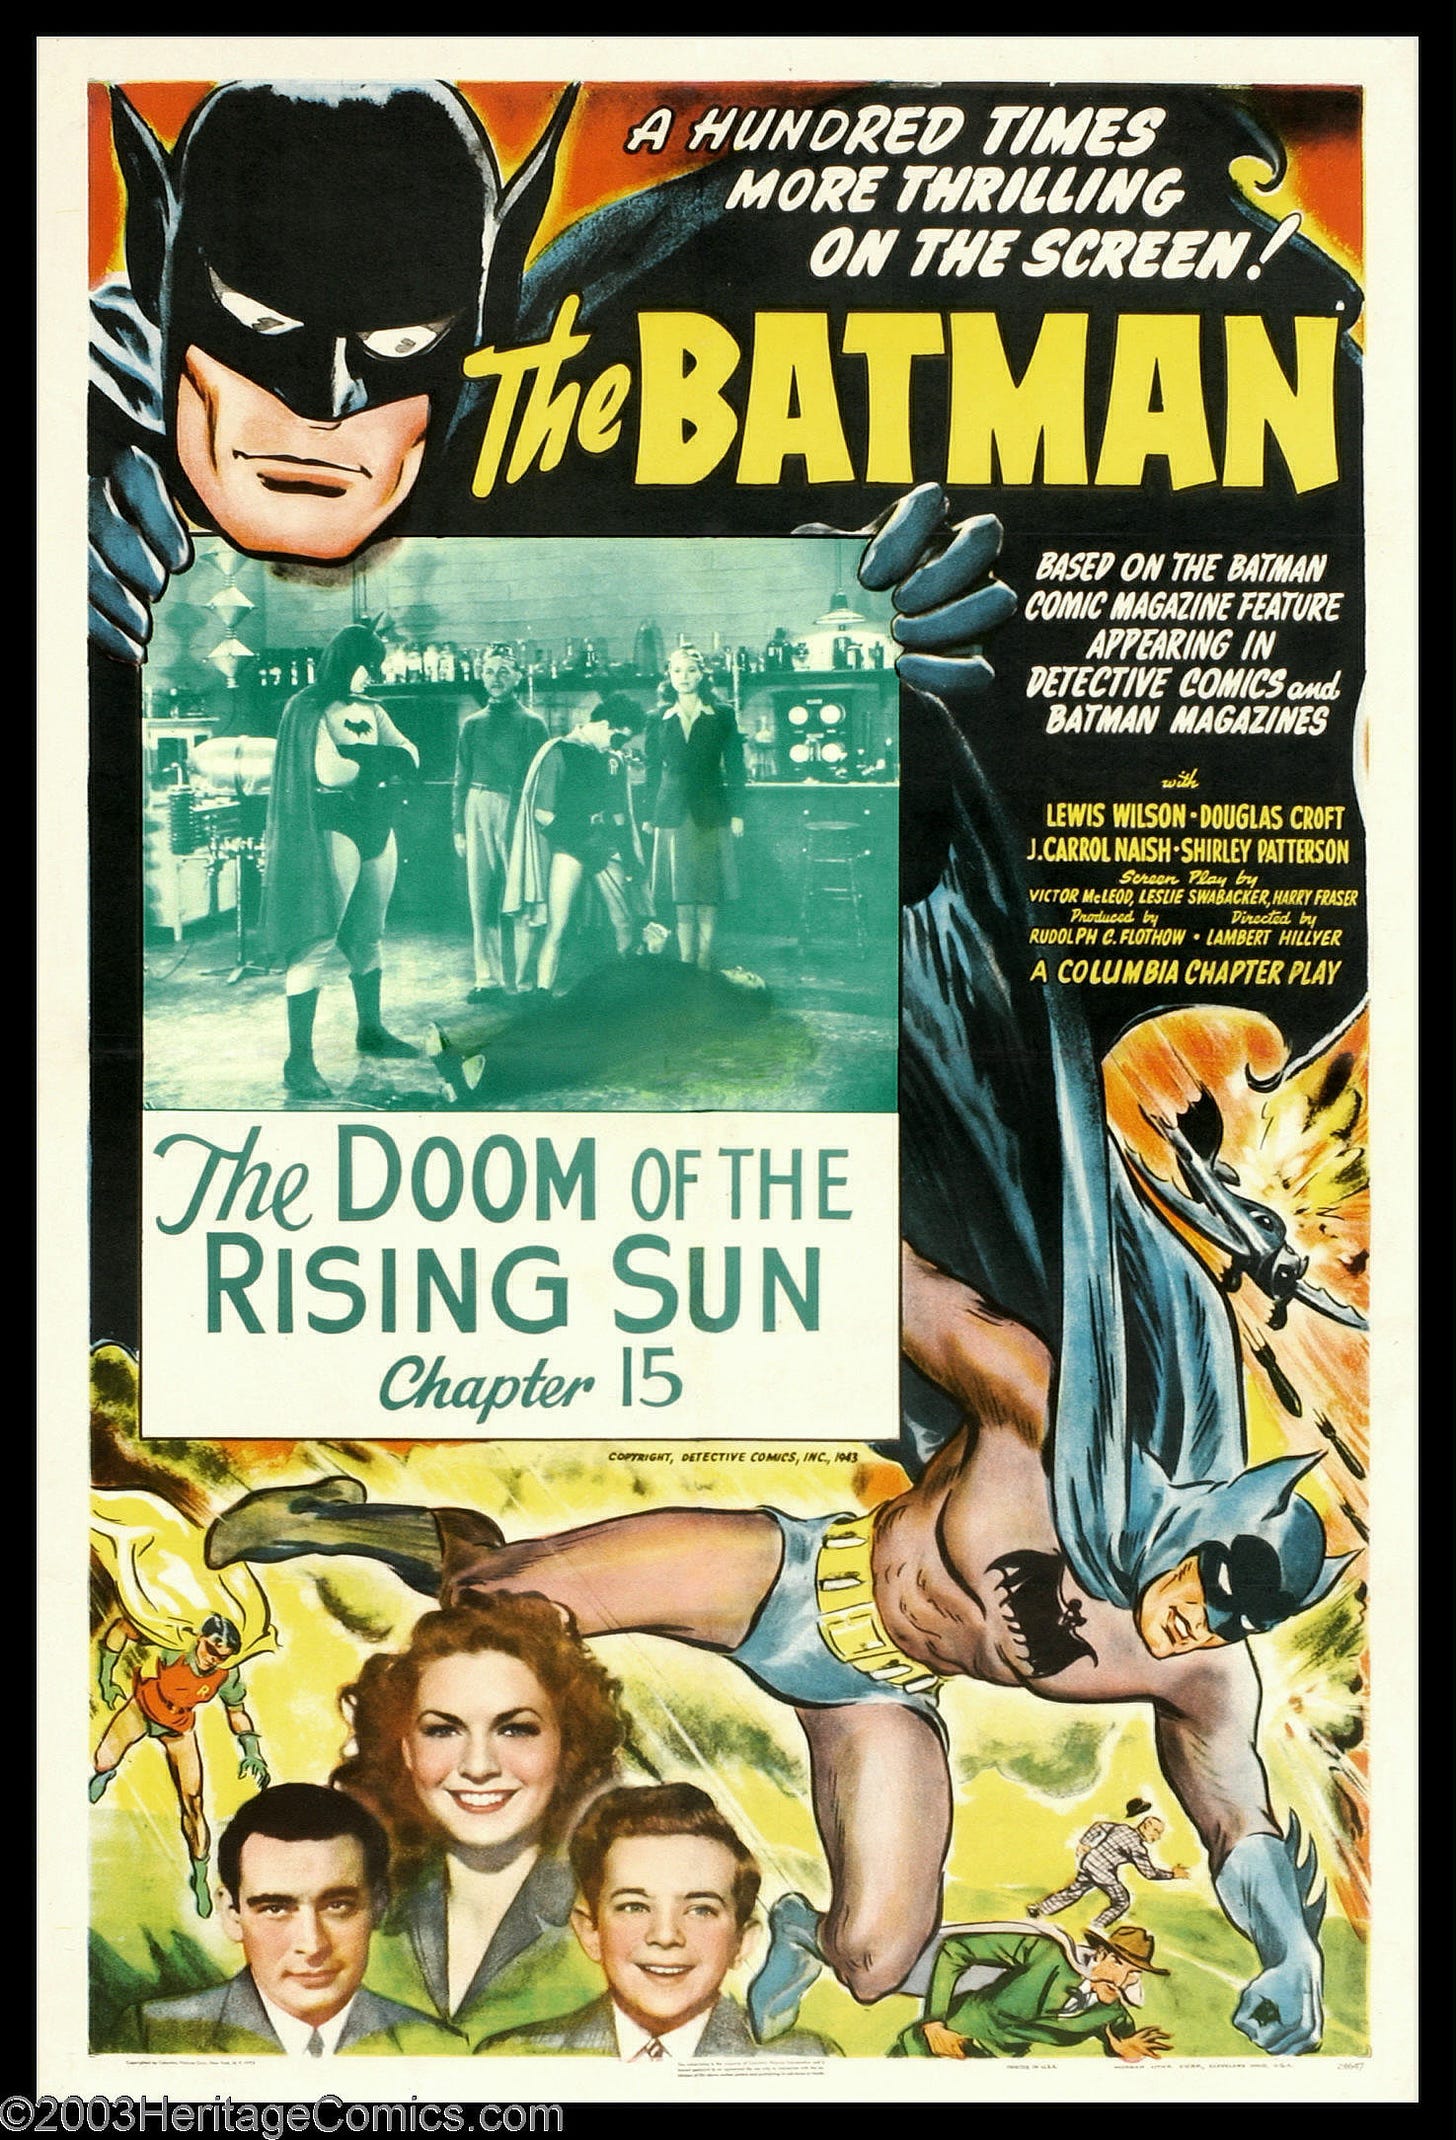 Poster for The Batman, 1943 movie serial), episode titled The Doom of the Rising Sun